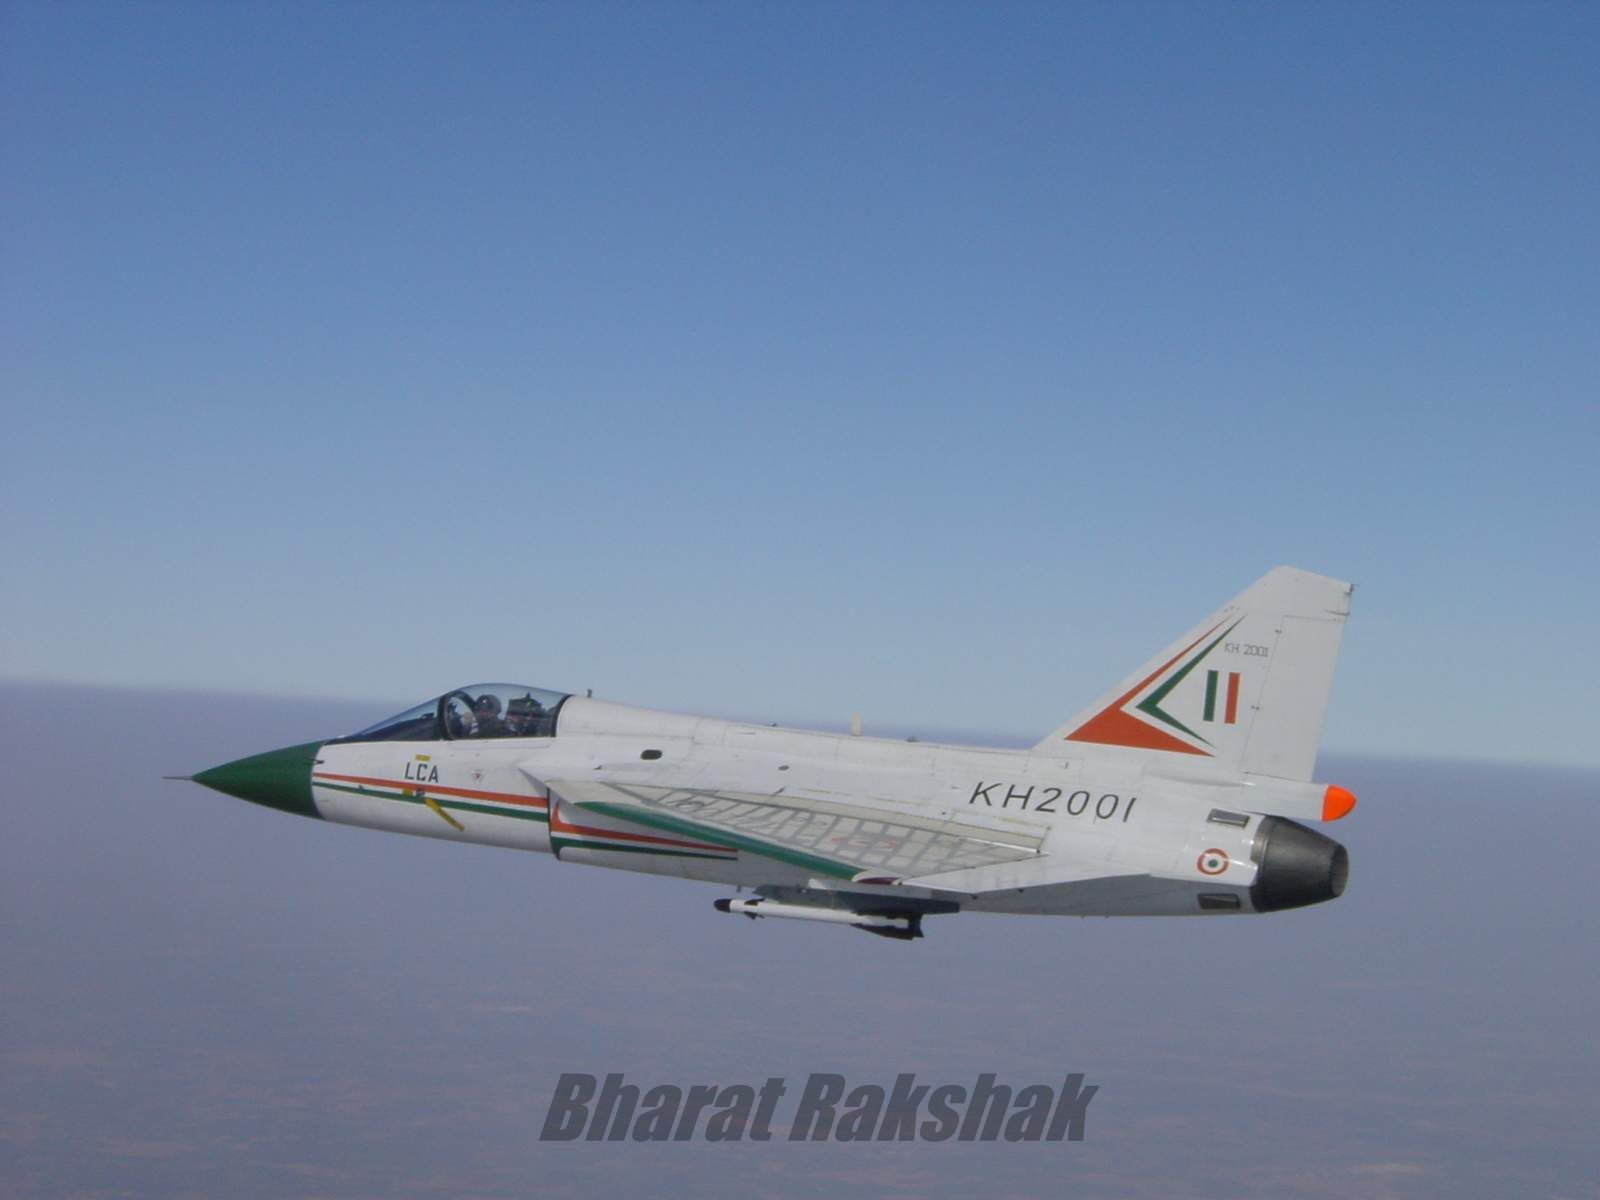 KH2001 during its fourth flight, on February 9th, at Aero India 2001